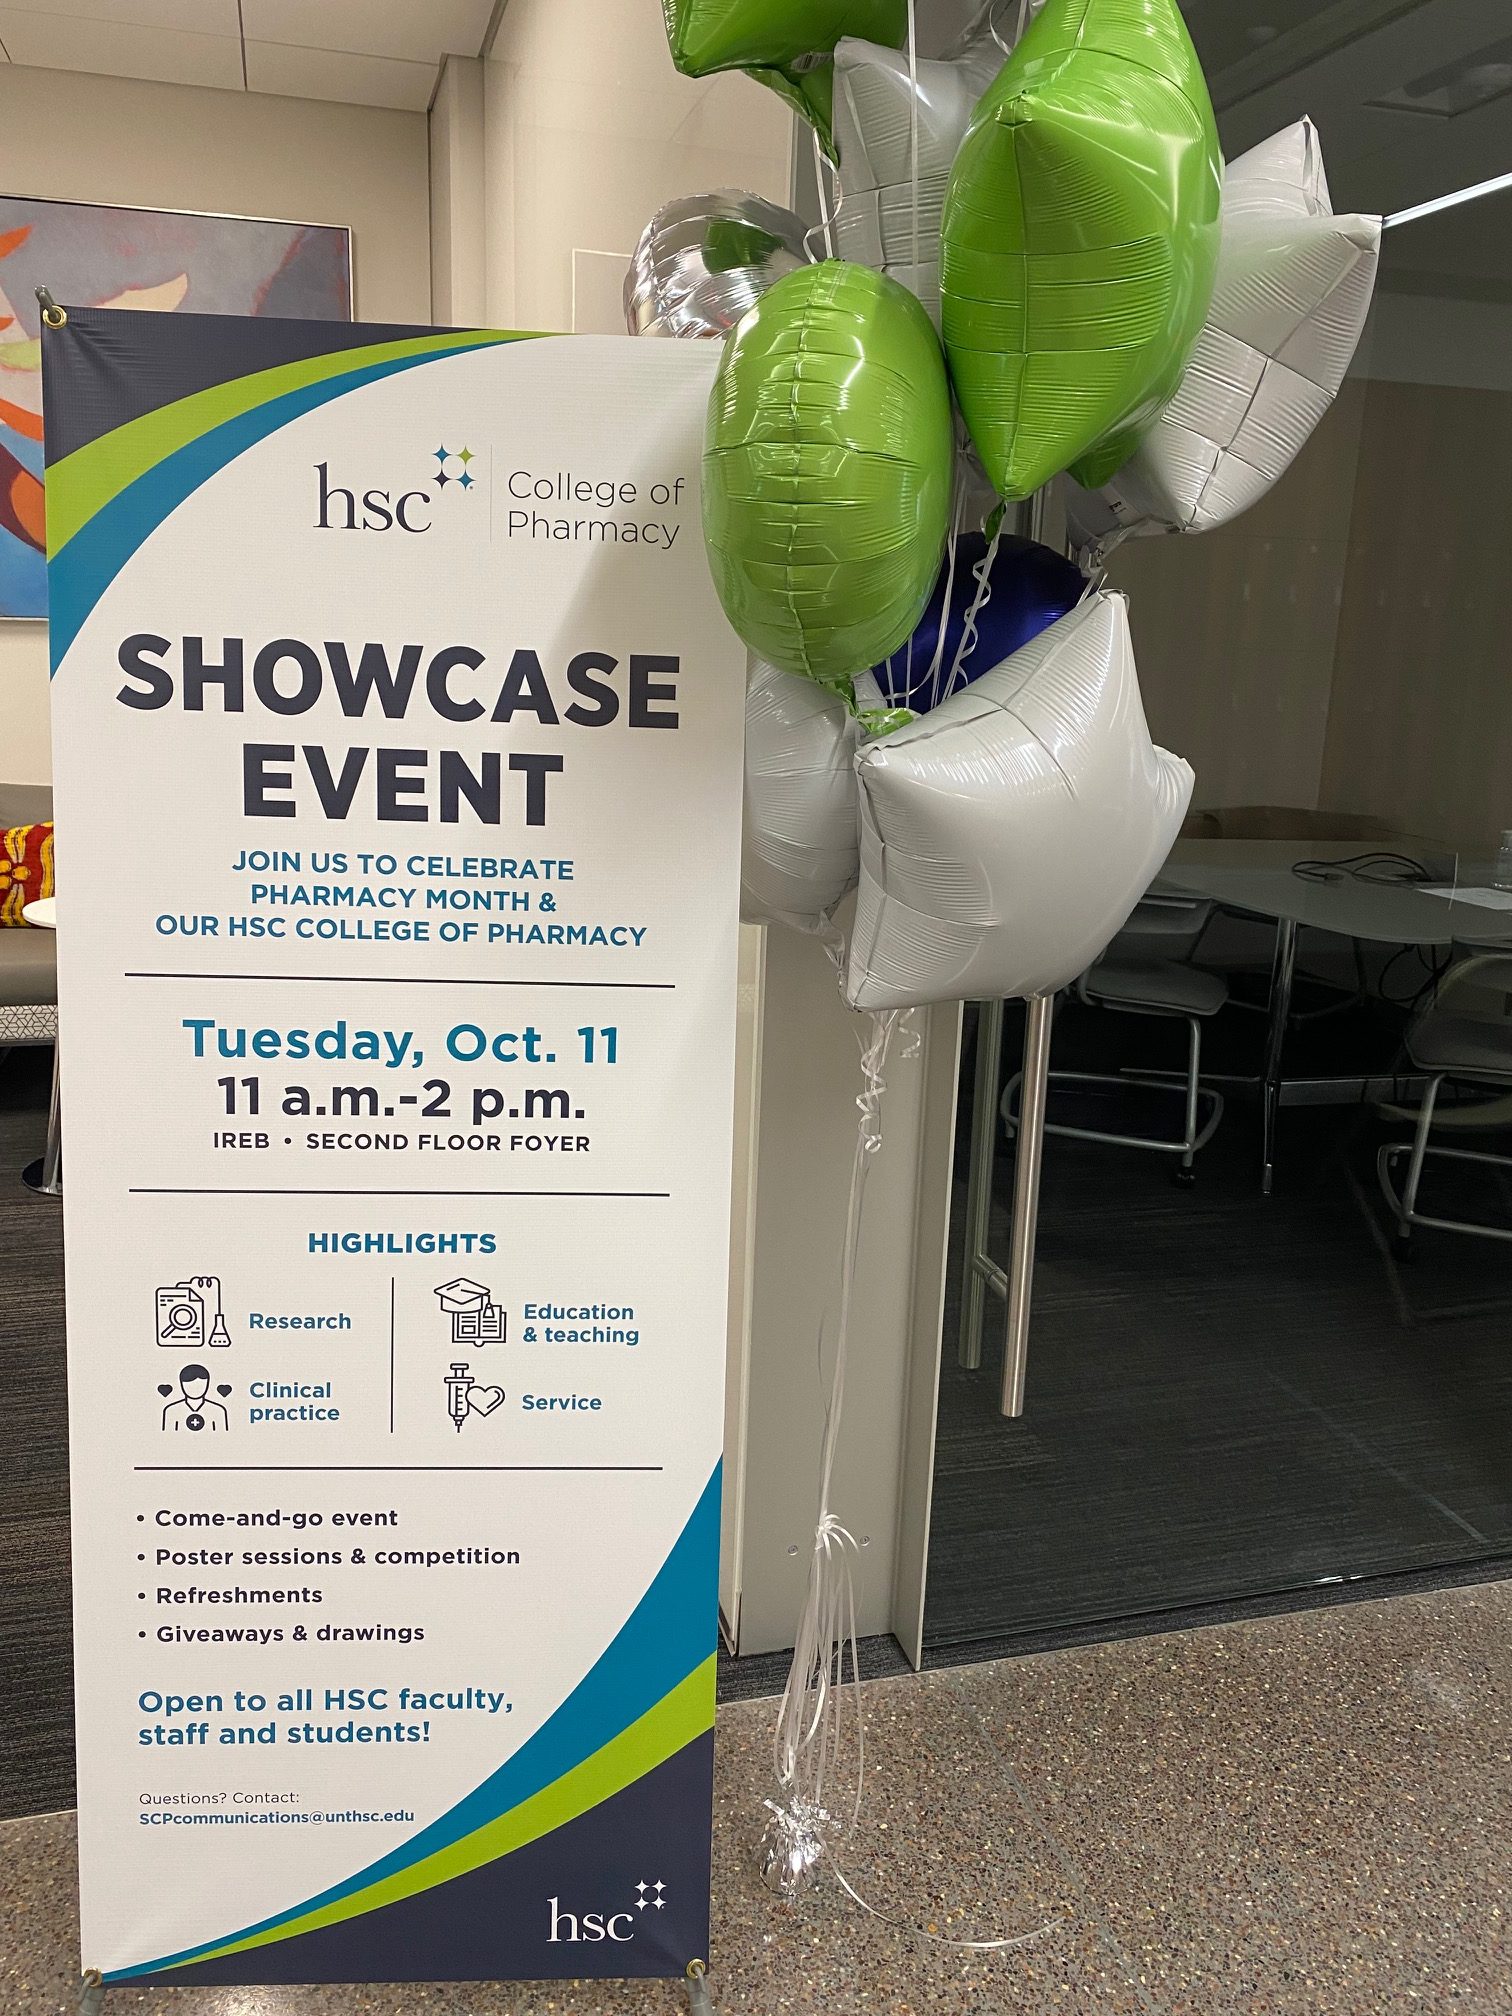 Image of the Showcase Banner sign